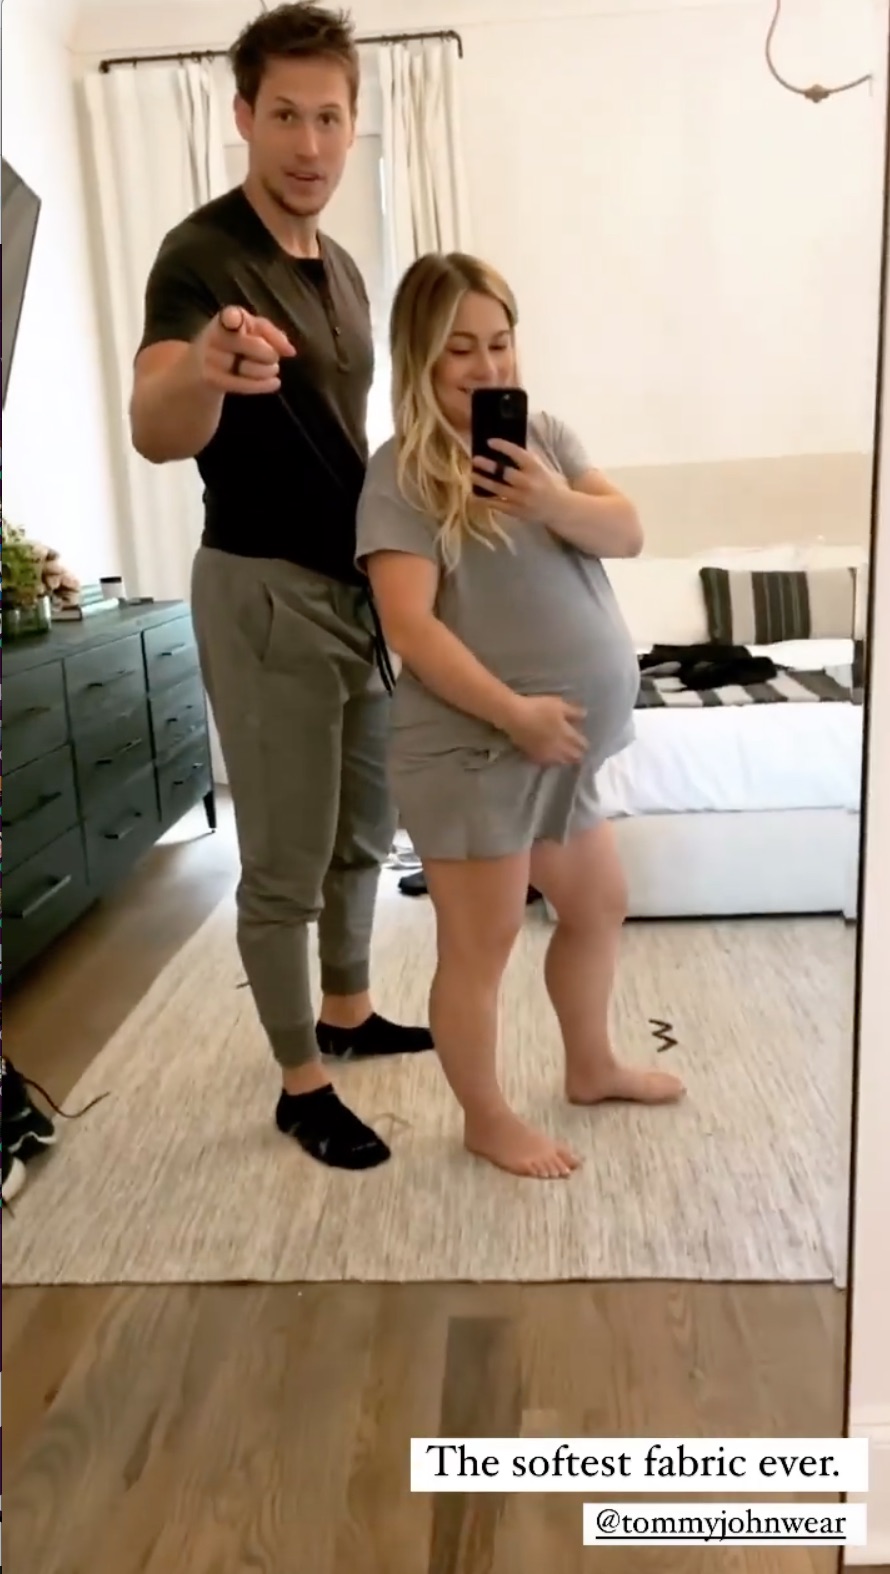 Pregnant Shawn Johnson East's Baby Bump Album Ahead of 2nd Child Going Gray